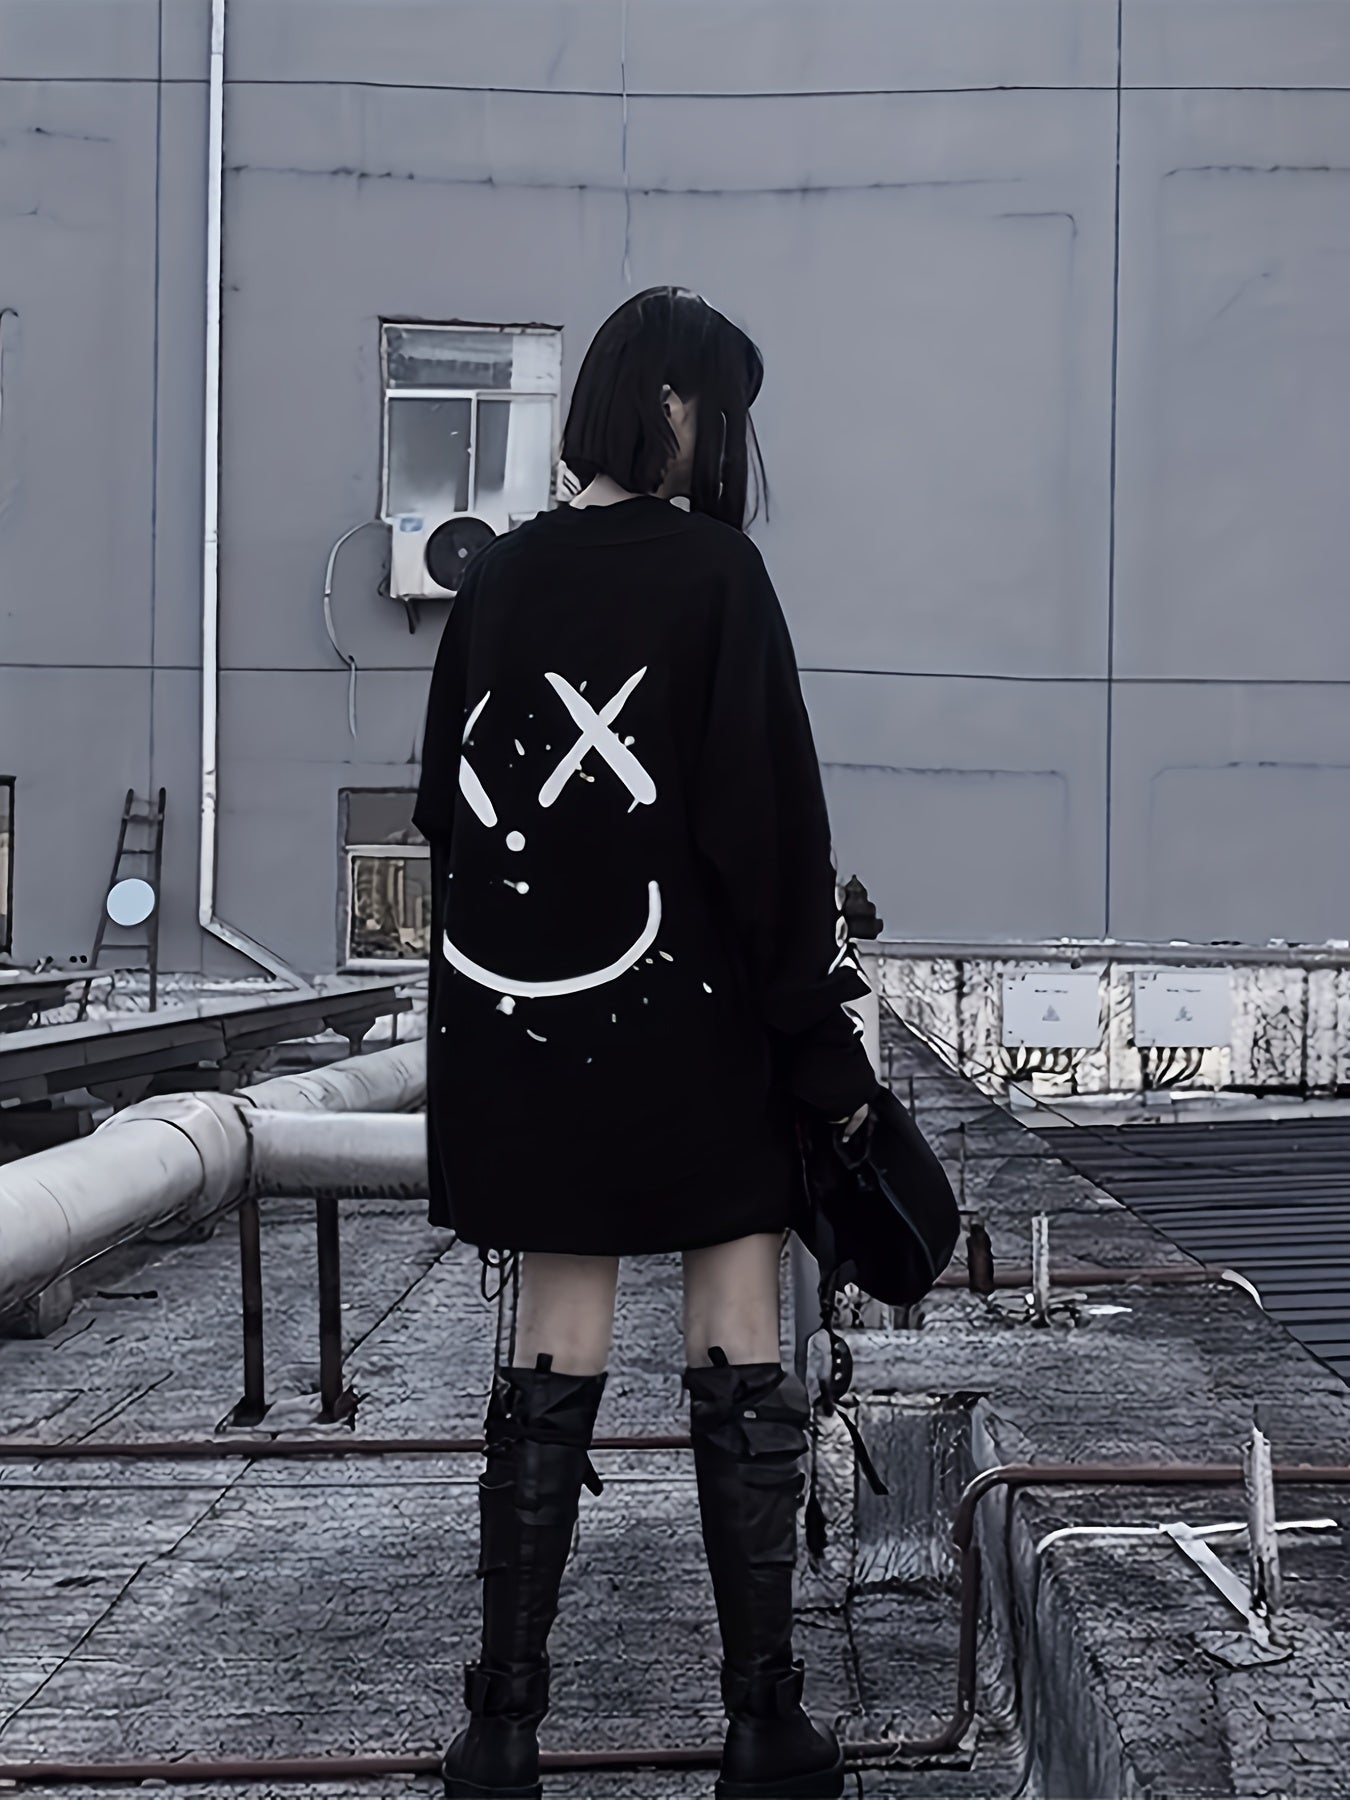 A person with black hair is standing on a rooftop, wearing black knee-high boots and a large Maramalive™ Graffiti Print Crew Neck T-Shirt, Casual Loose Long Sleeve Top For Spring & Fall, Women's Clothing with a smiley face design on the back. The background is a grey building wall.